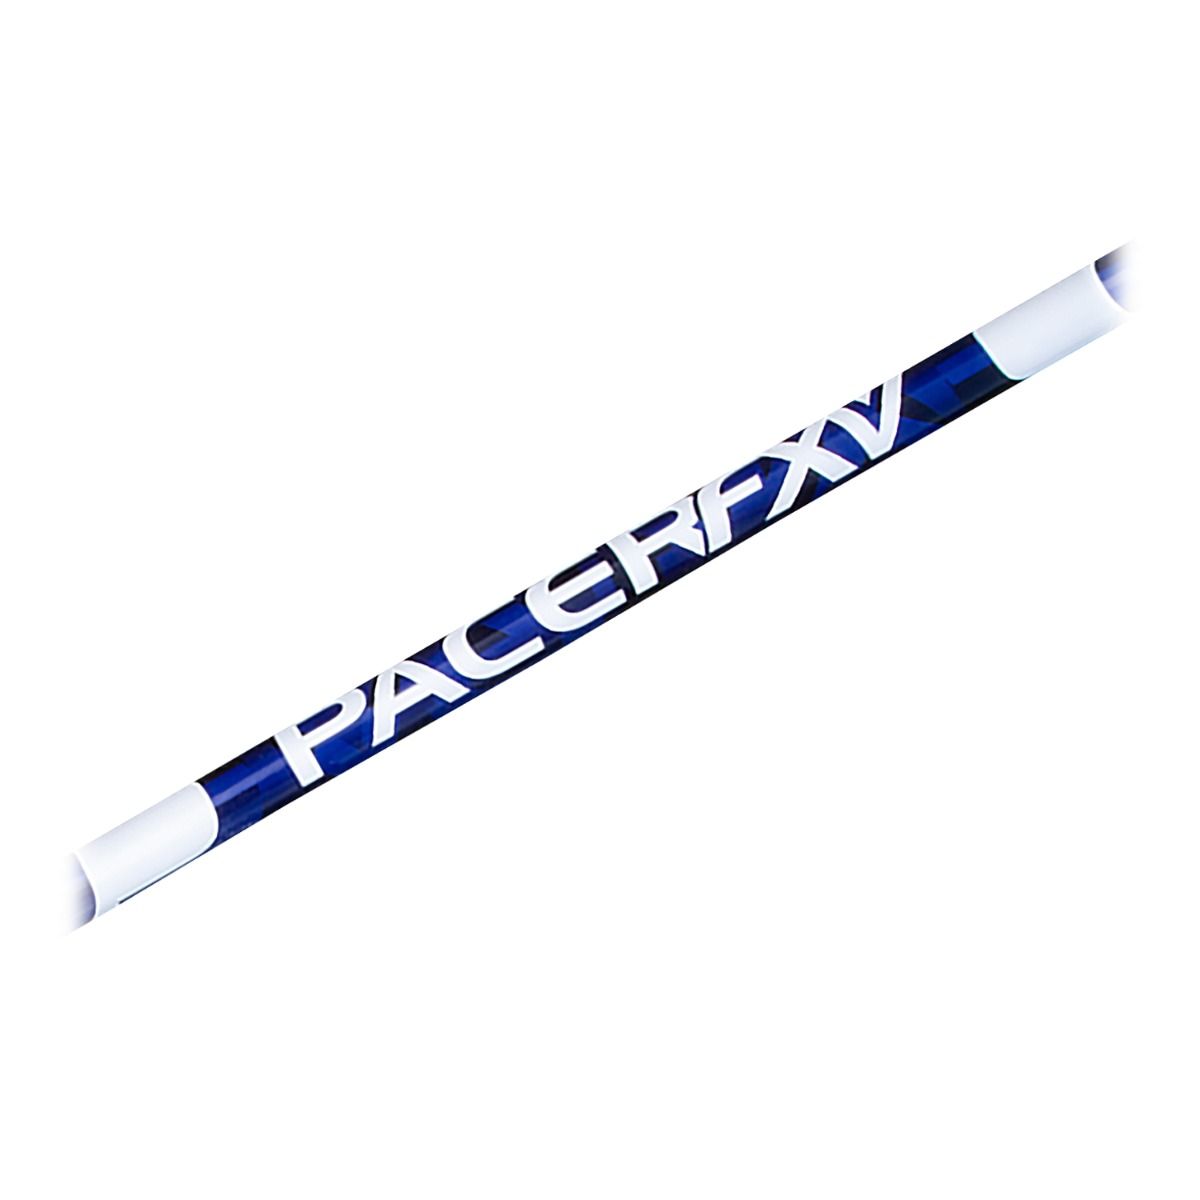 Gill PacerFXV 11' Vaulting Pole